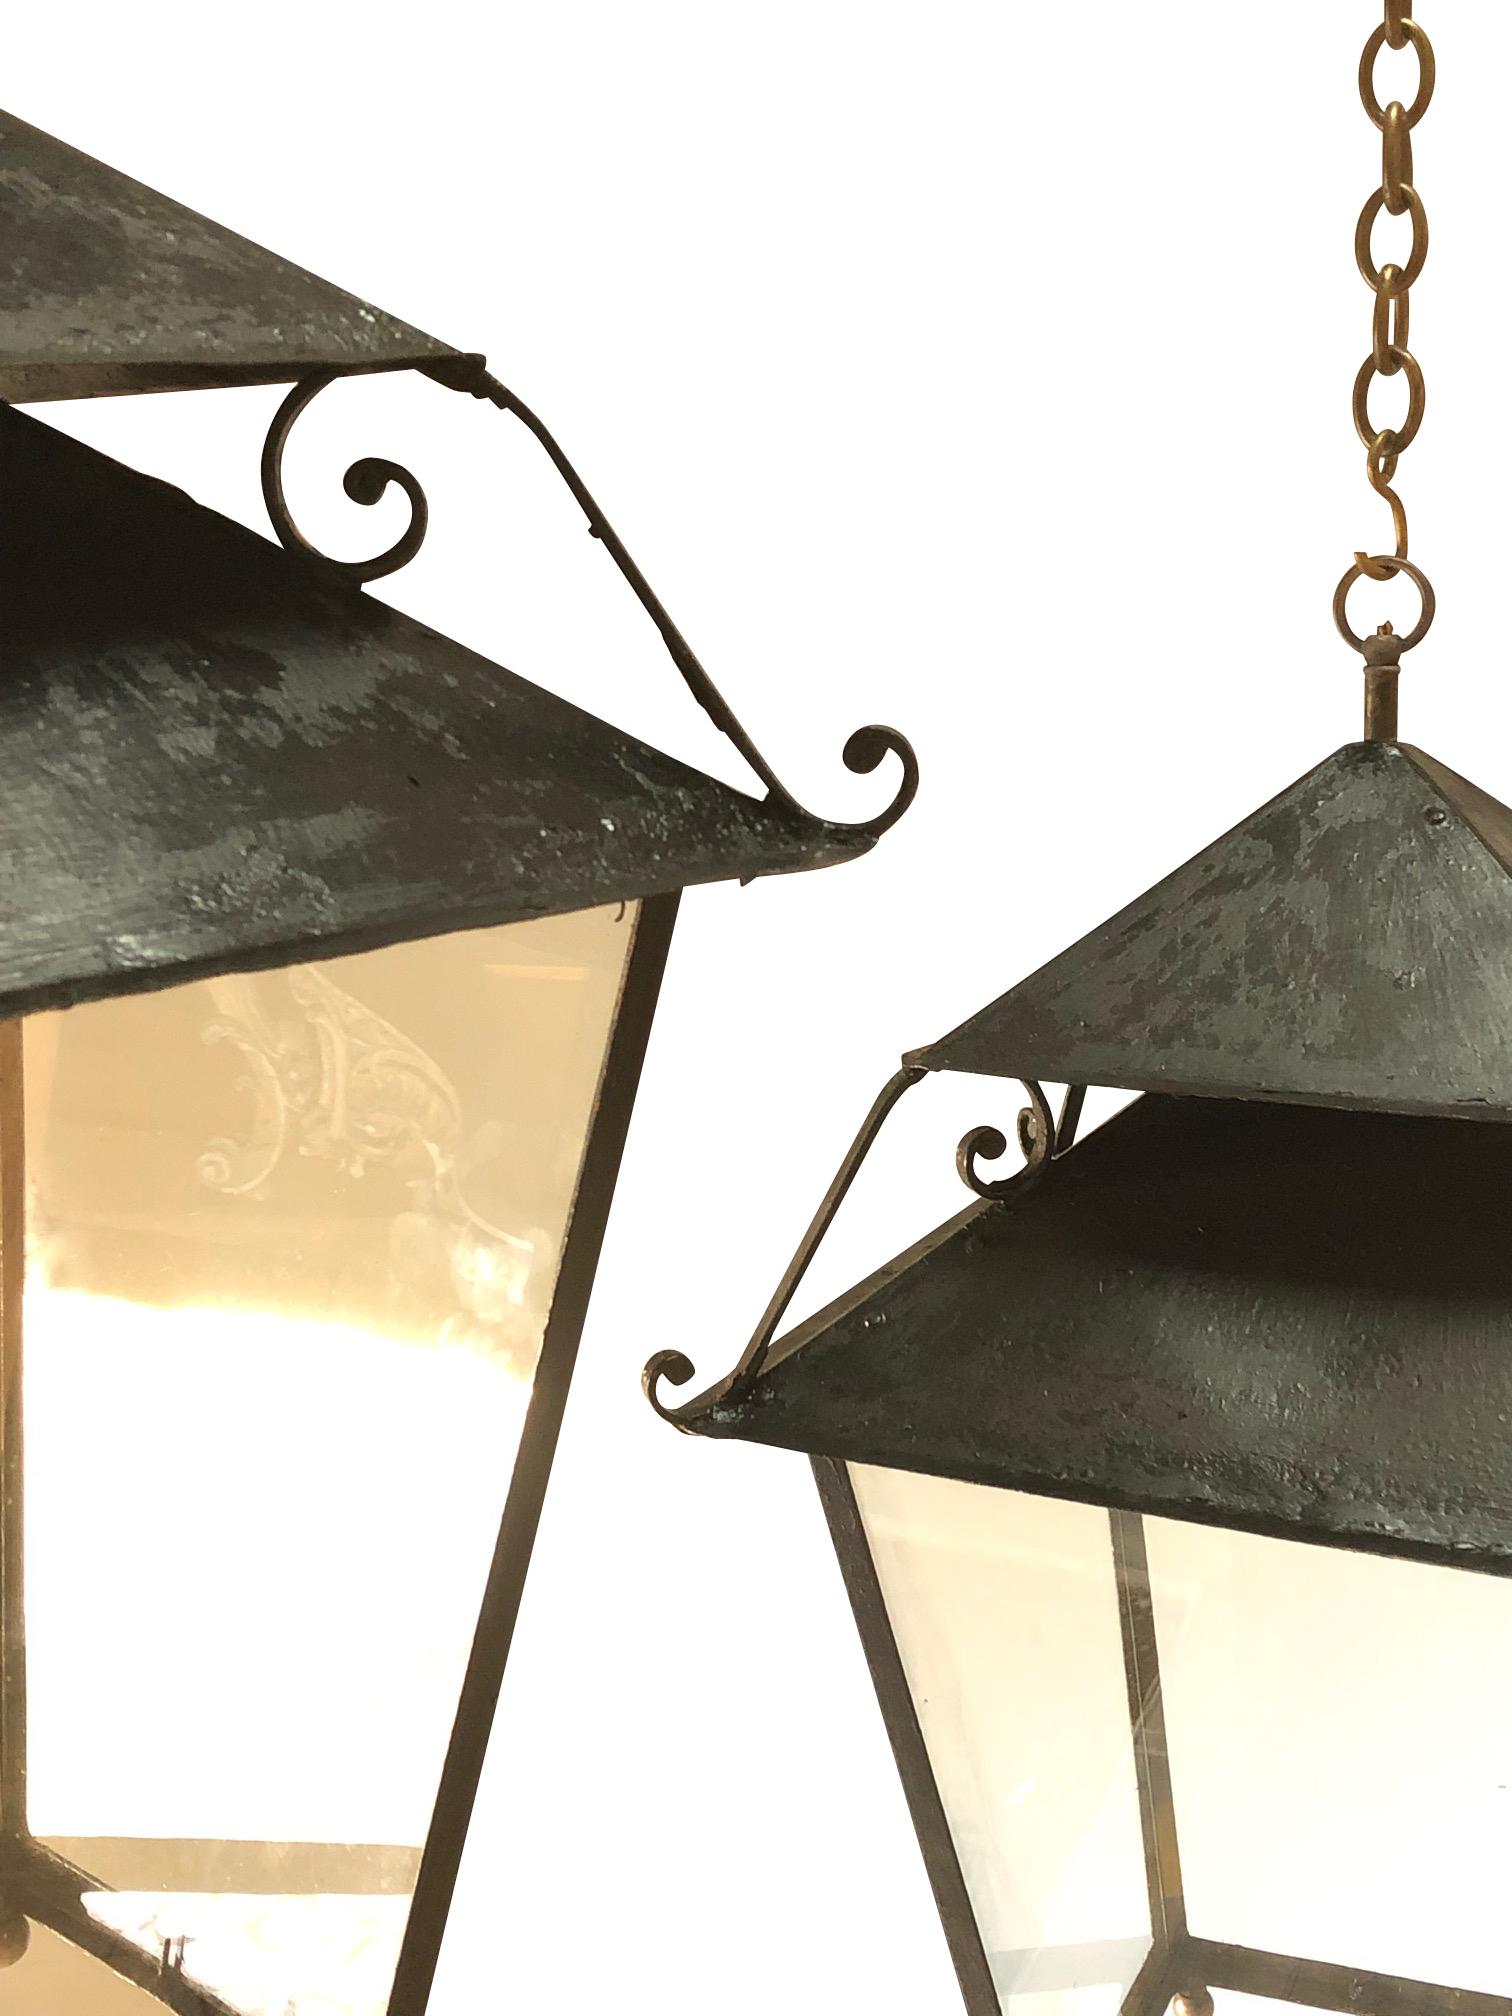 19th Century French pair unusual design lanterns
Made of iron and toleware
Clear glass.
Beautiful natural aged patina.
Bottom dimensions are 8.5